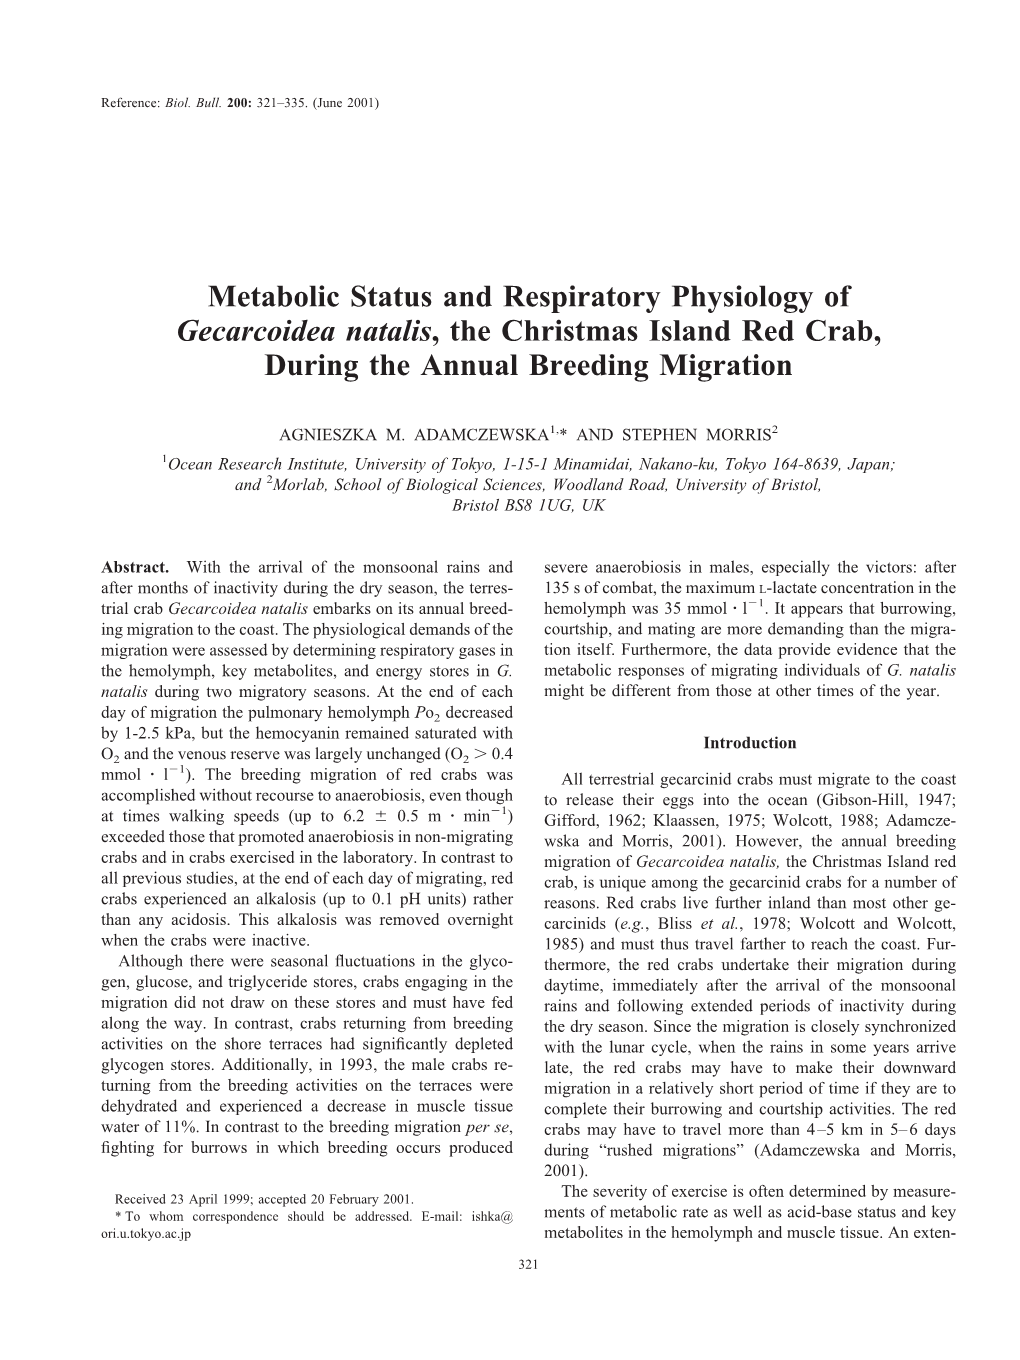 Metabolic Status and Respiratory Physiology of Gecarcoidea Natalis, the Christmas Island Red Crab, During the Annual Breeding Migration